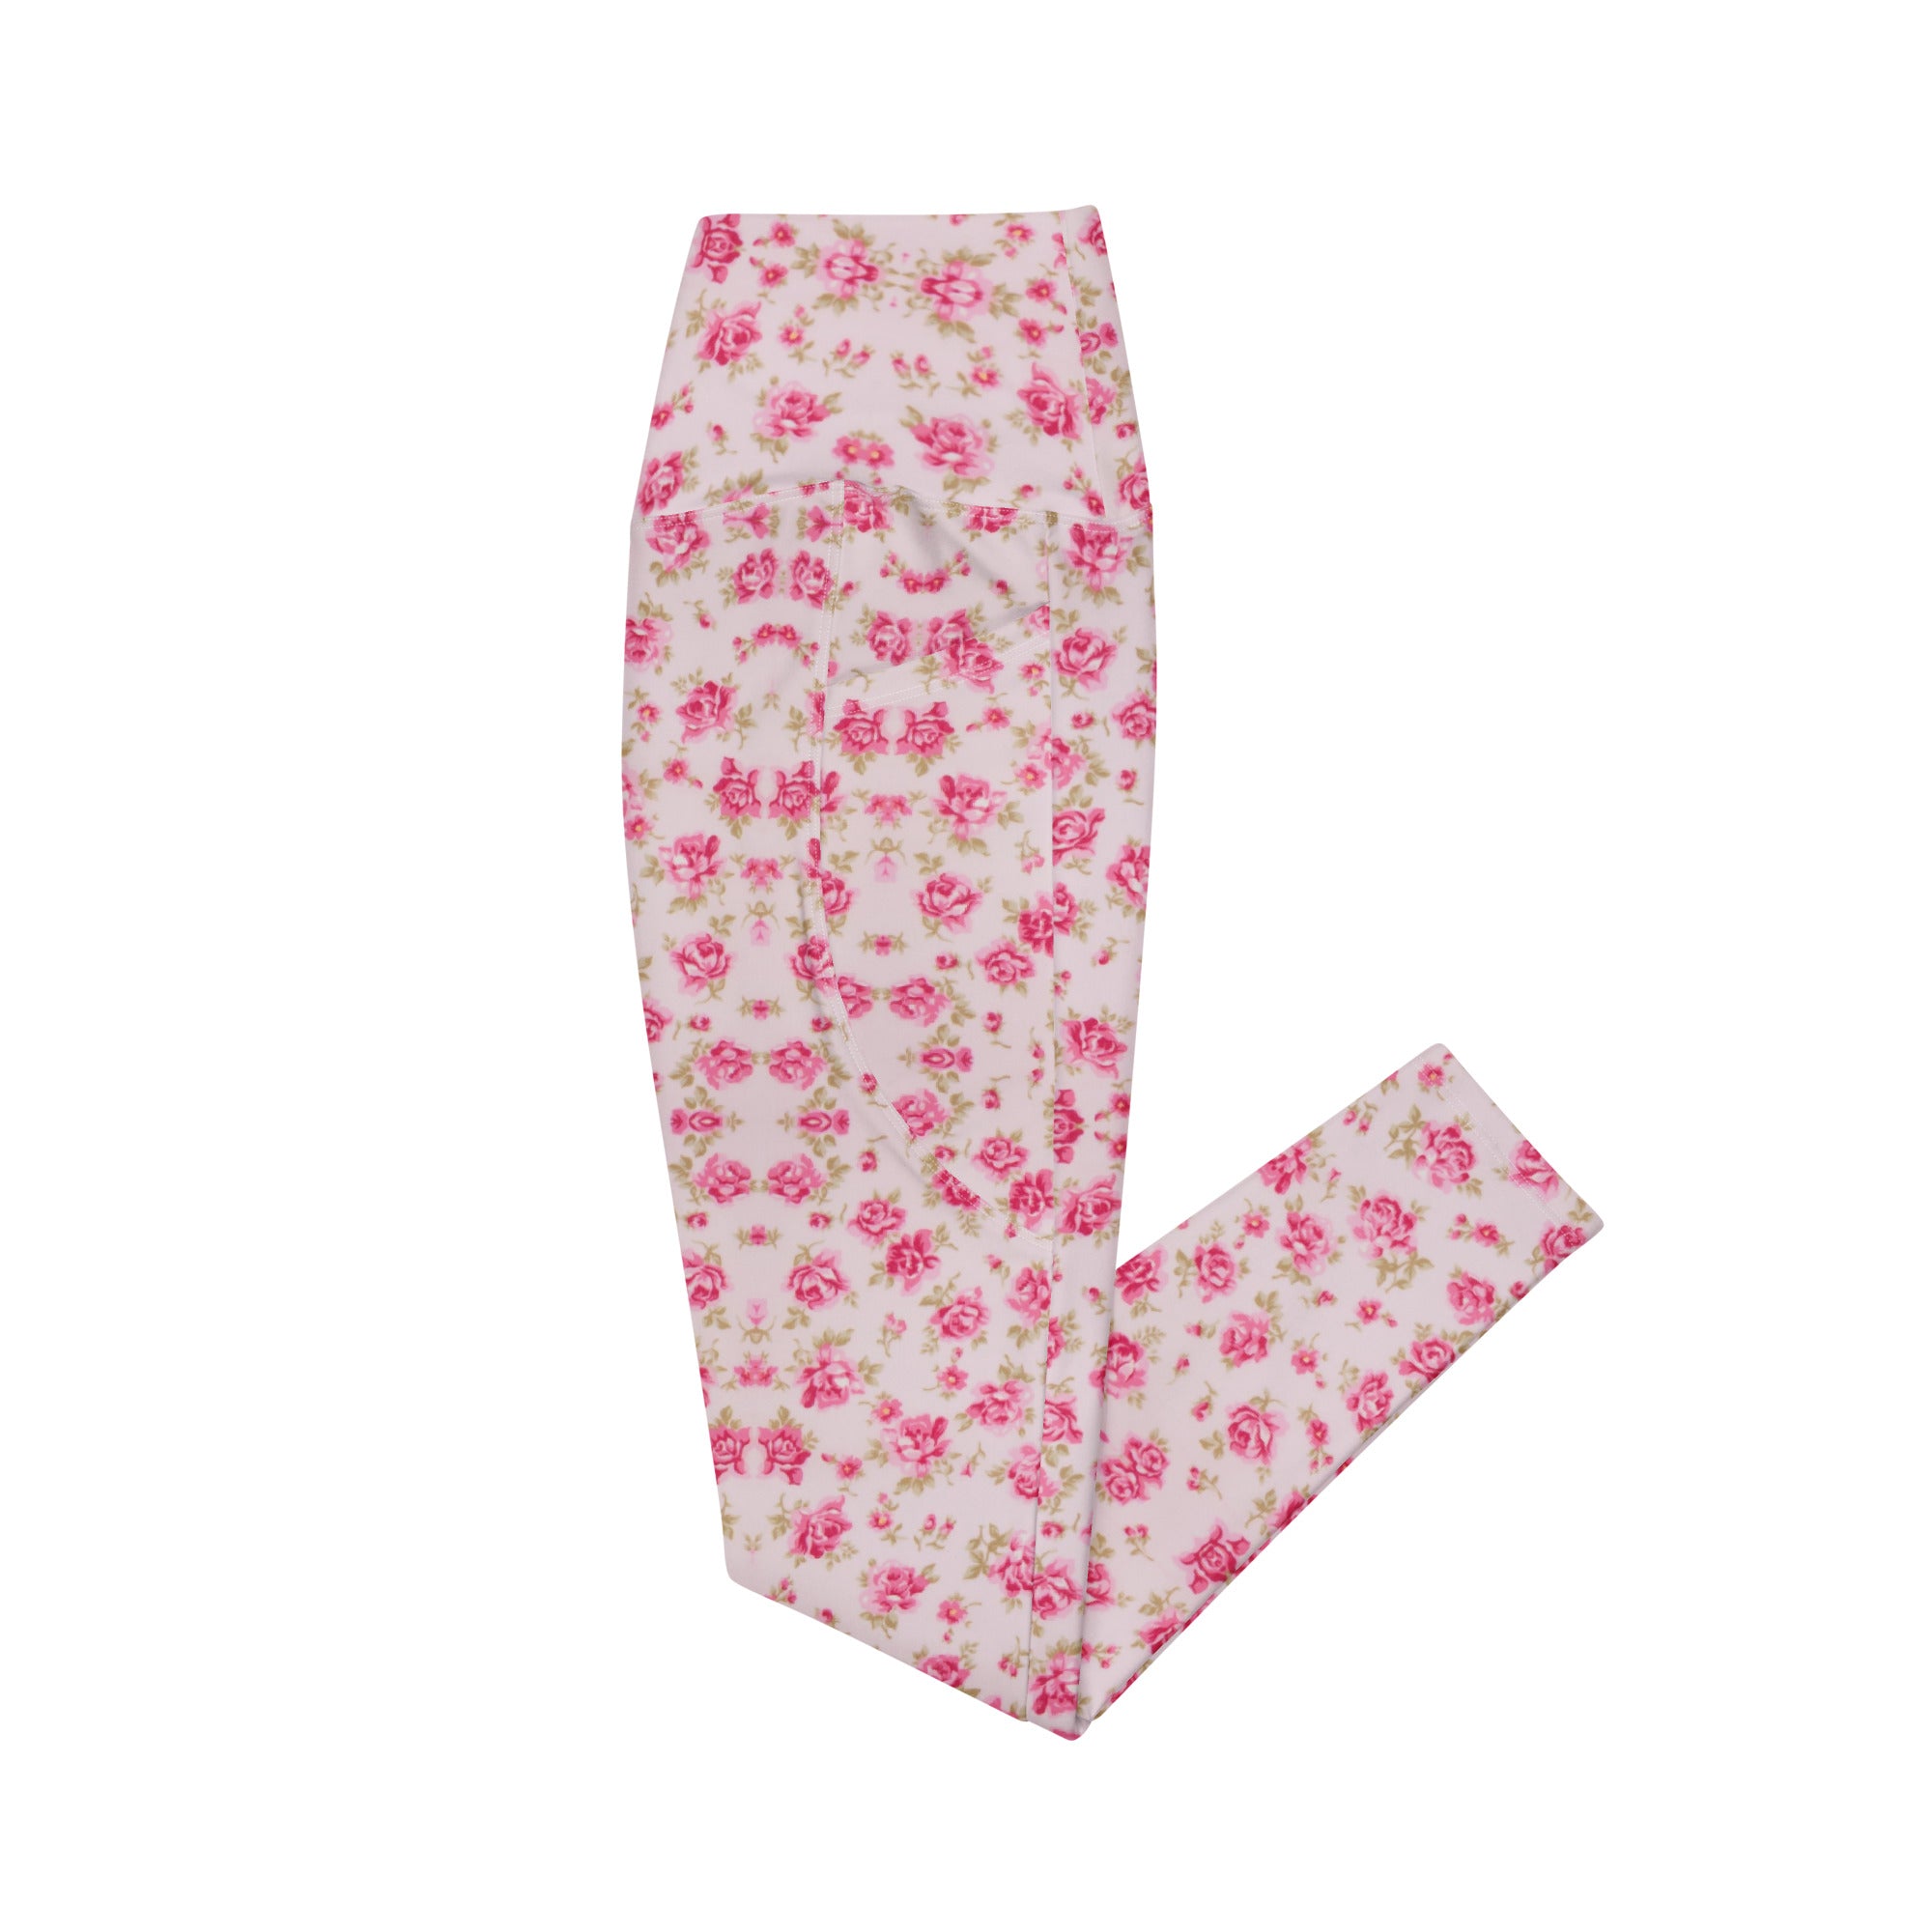 TBP Pink Floral Leggings With Pockets